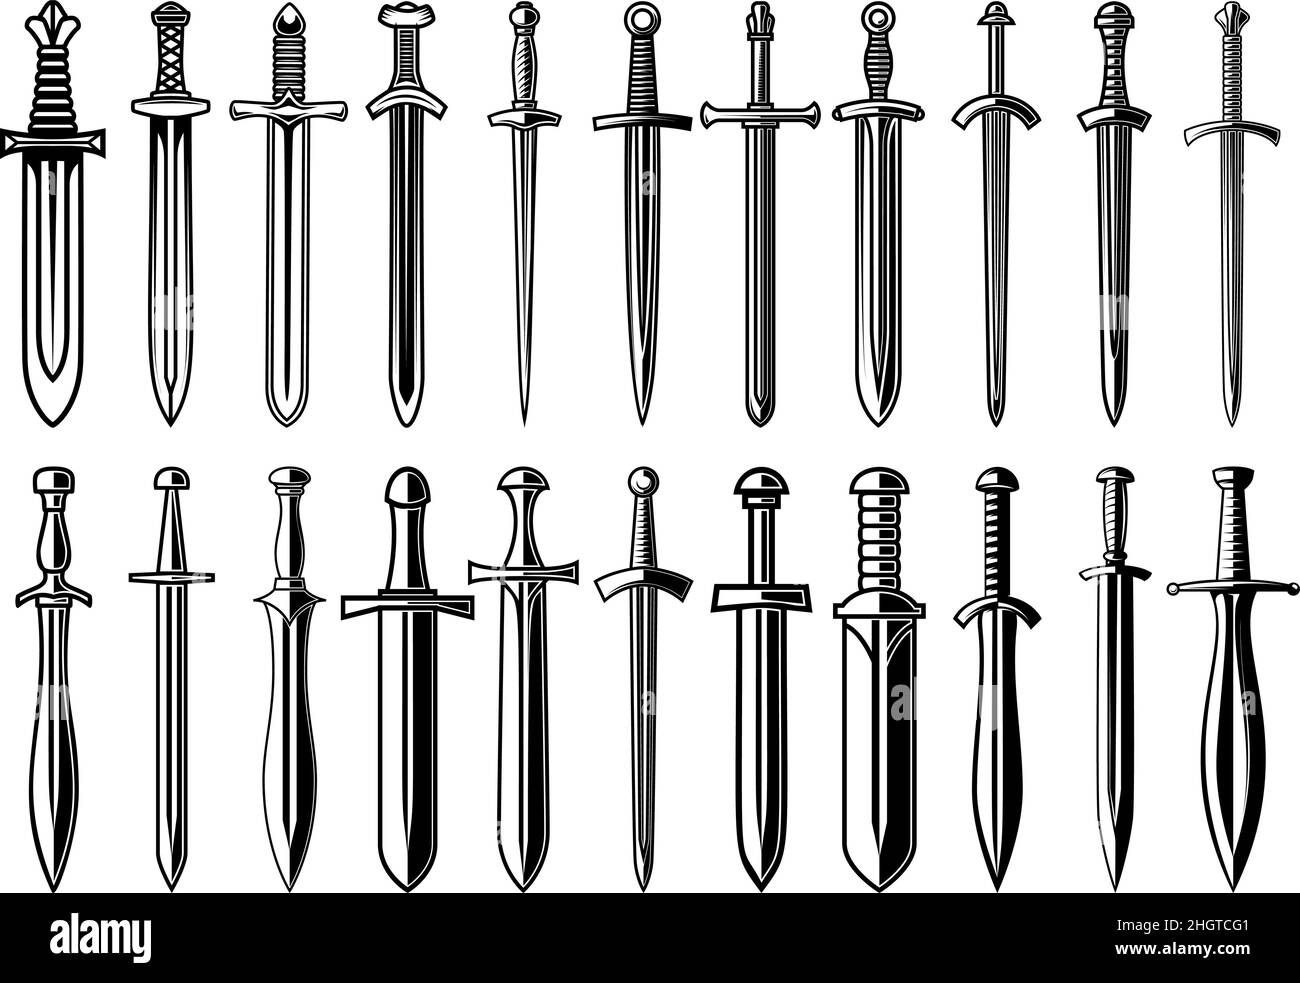 Crossed Sword Medieval Knight Weapon Soldier Item Symbol Of War And Battle  Stock Illustration - Download Image Now - iStock